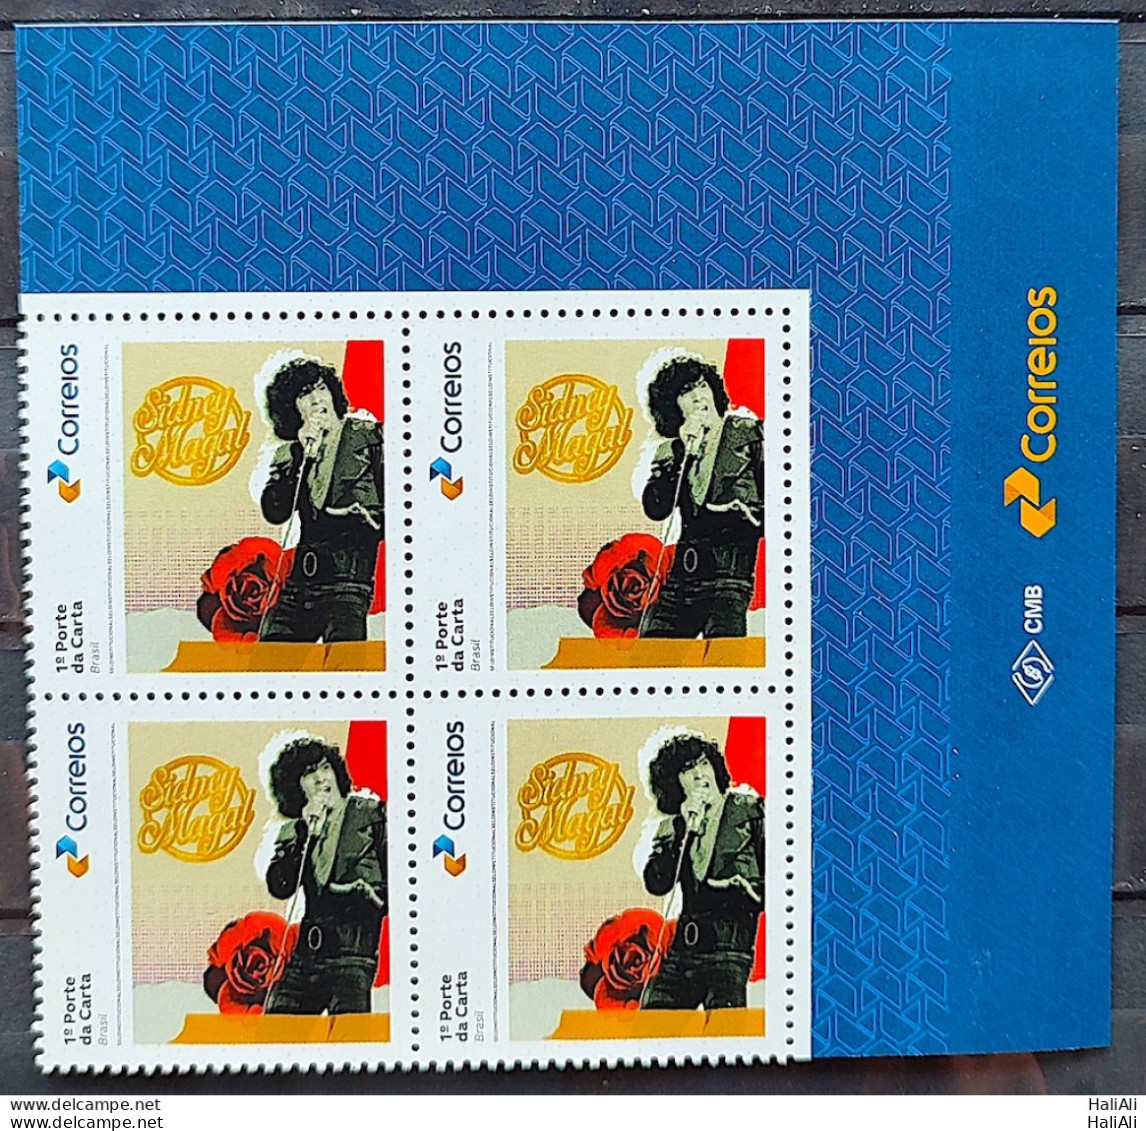 SI 01 Brazil Institutional Stamp Sidney Magal Music 2023 Block Of 4 Vignette Correios - Sellos Personalizados